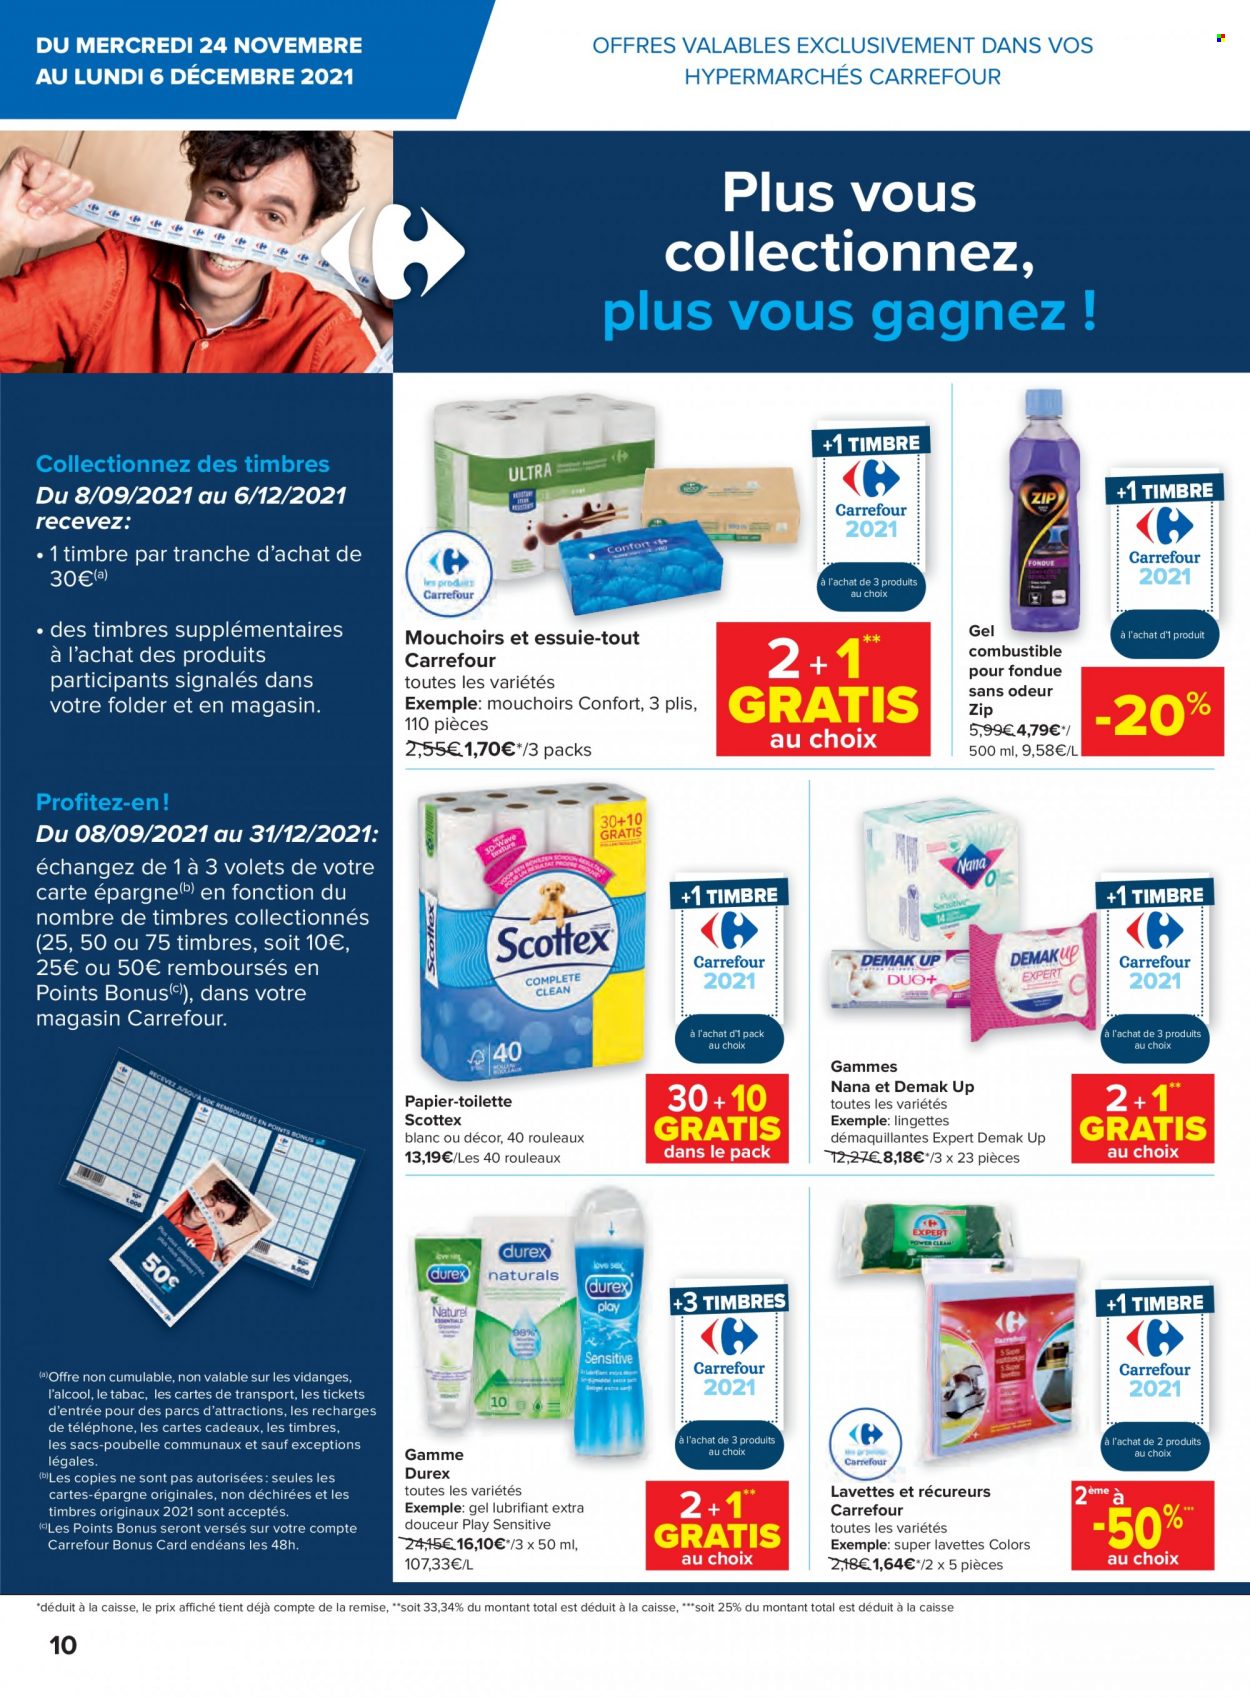 Catalogue Carrefour hypermarkt - 24.11.2021 - 6.12.2021. Page 10.